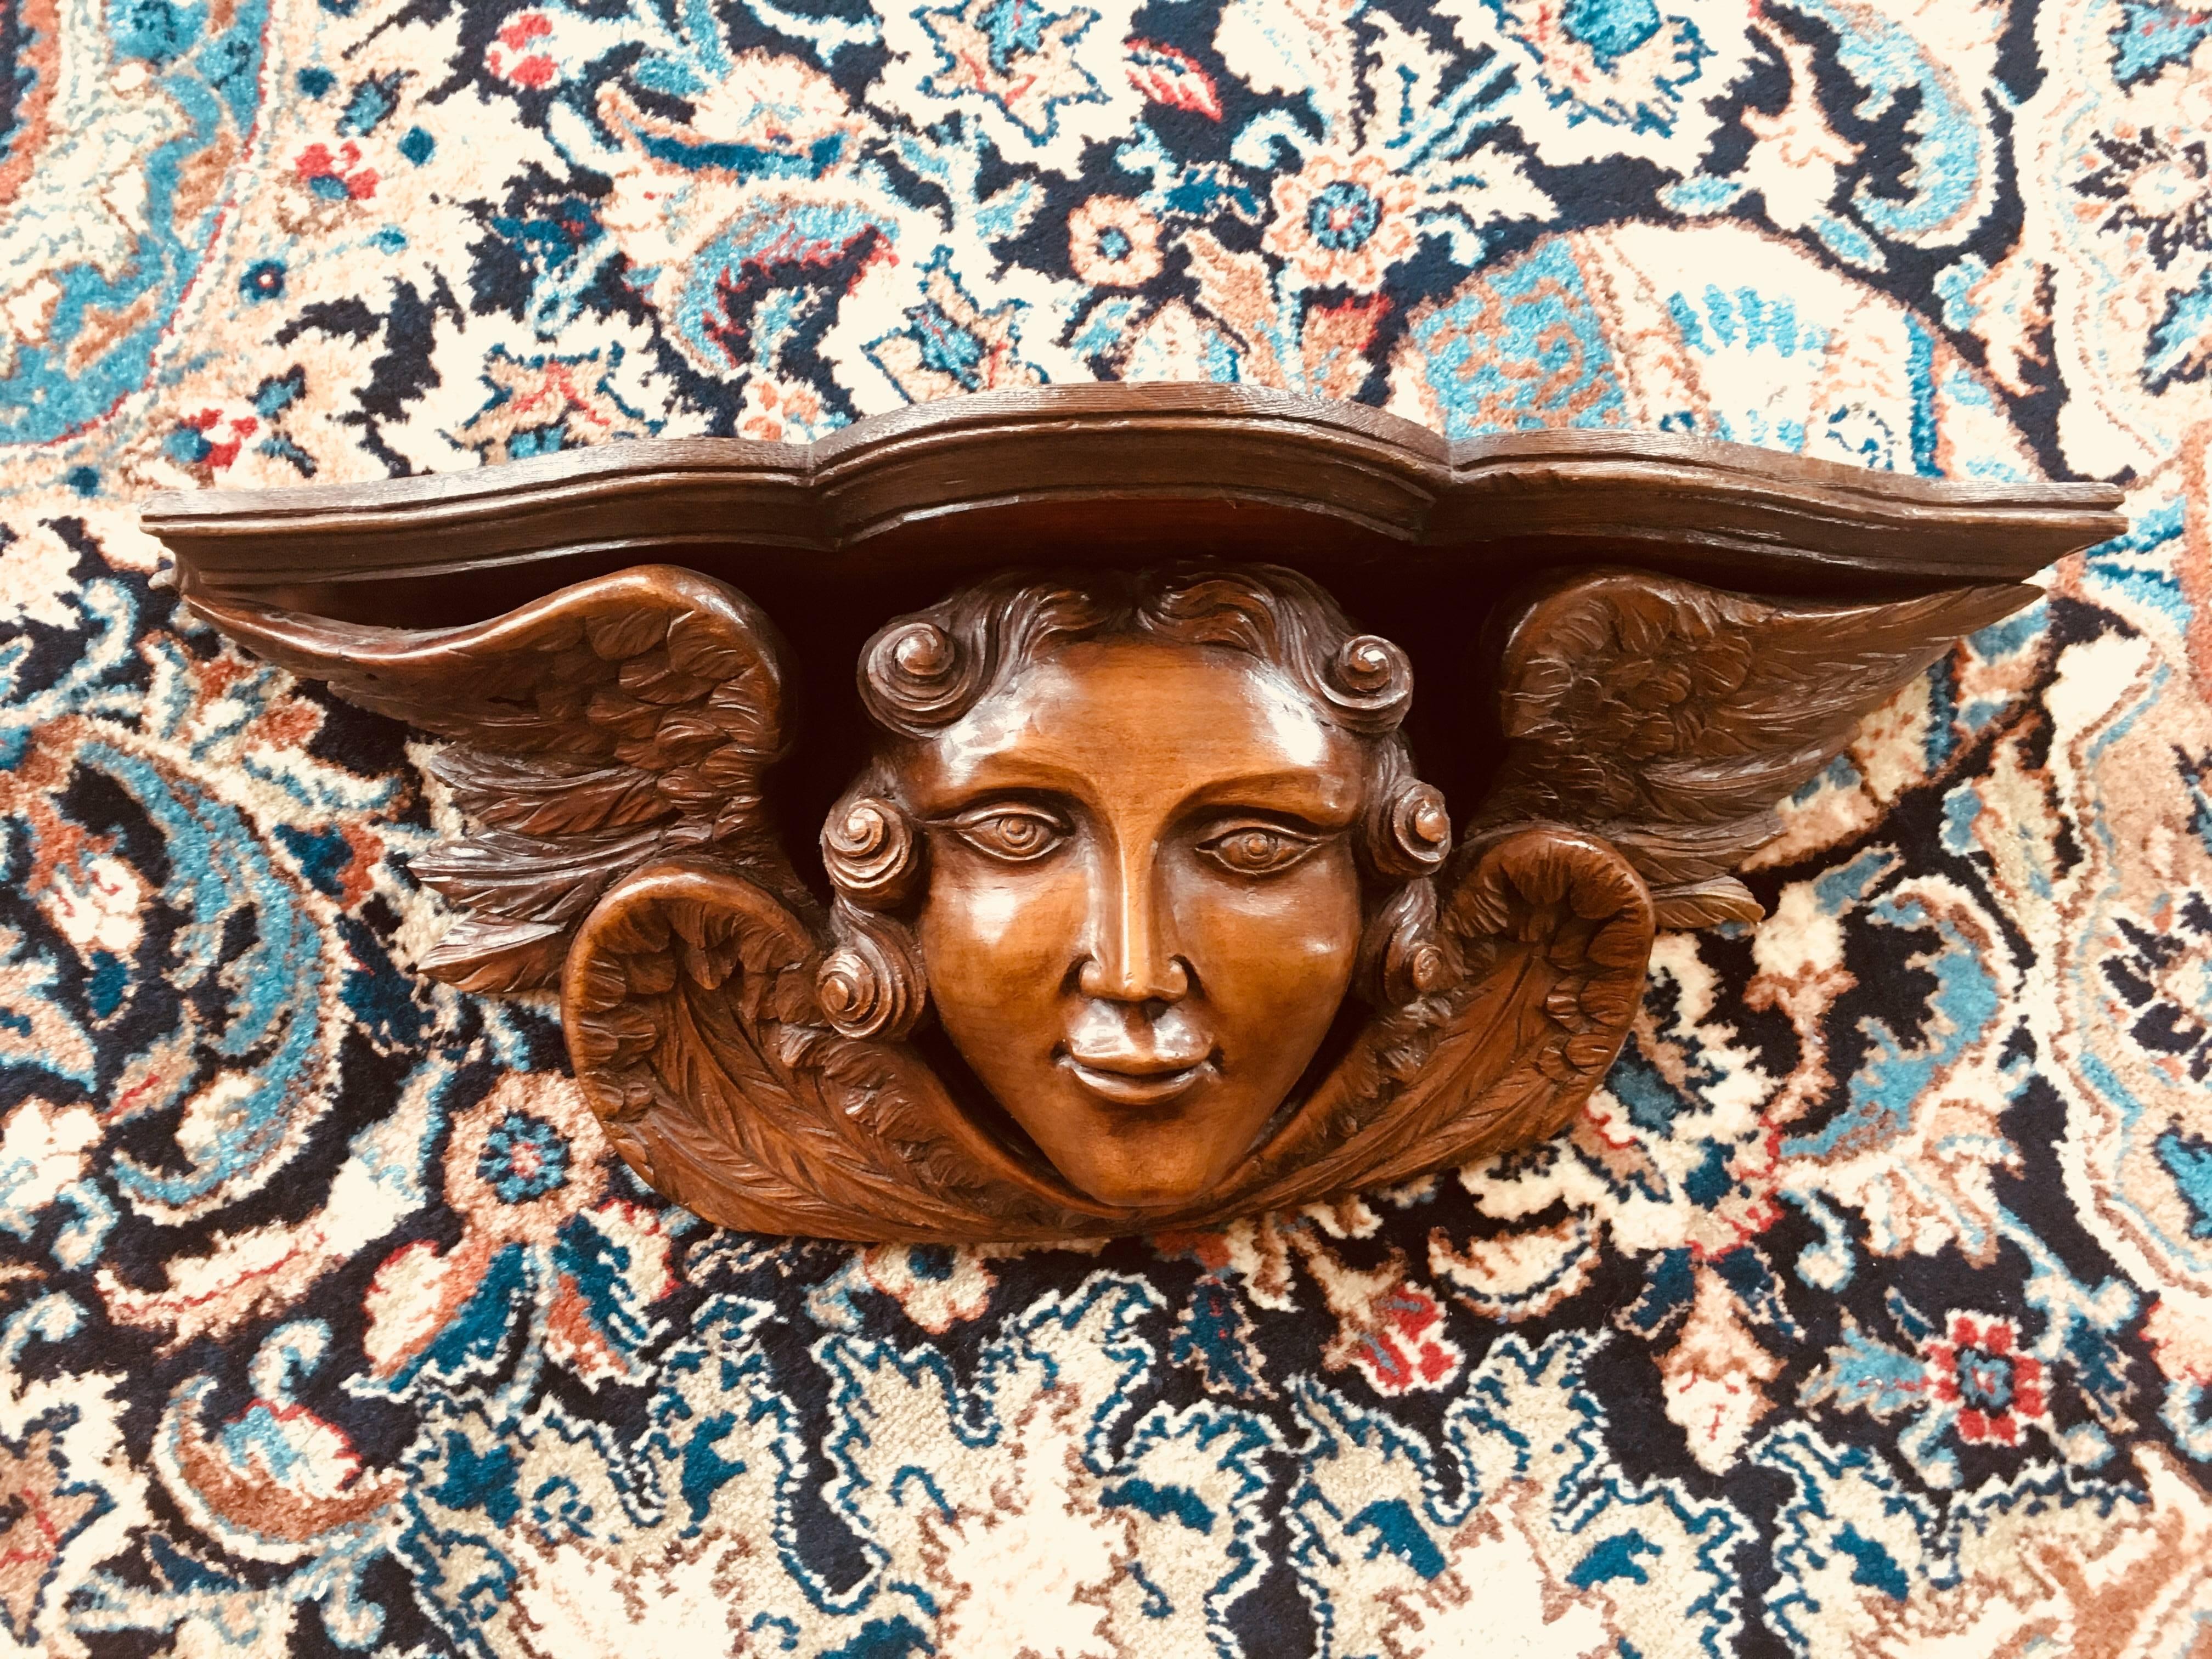 18th century walnut sculpture of an angel's head surrounded by four wings, that could be used as a small shelf.
Made in France, circa 1780.